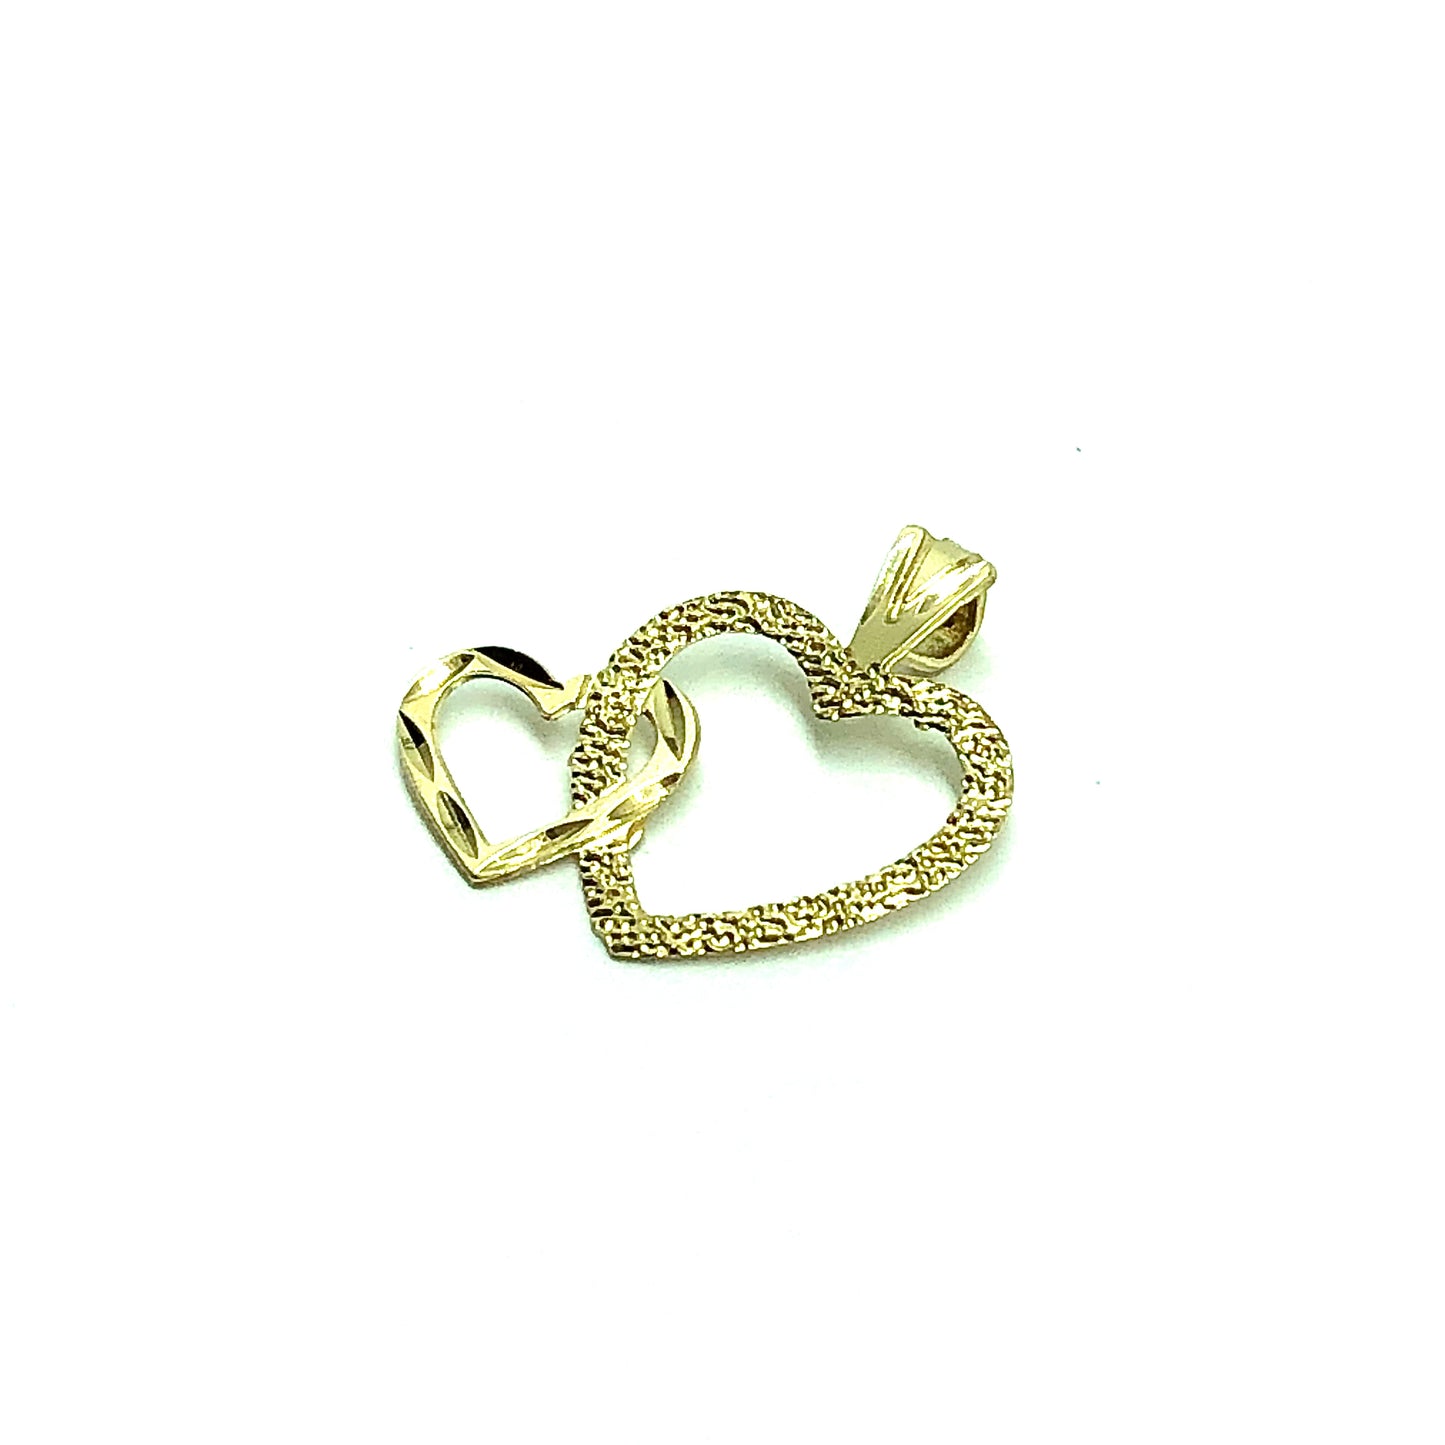 Jewelry Womens Charm - Fun Love Textured Style 14k Gold Two Heart Design Pendant - Blingschlingers.com in USA